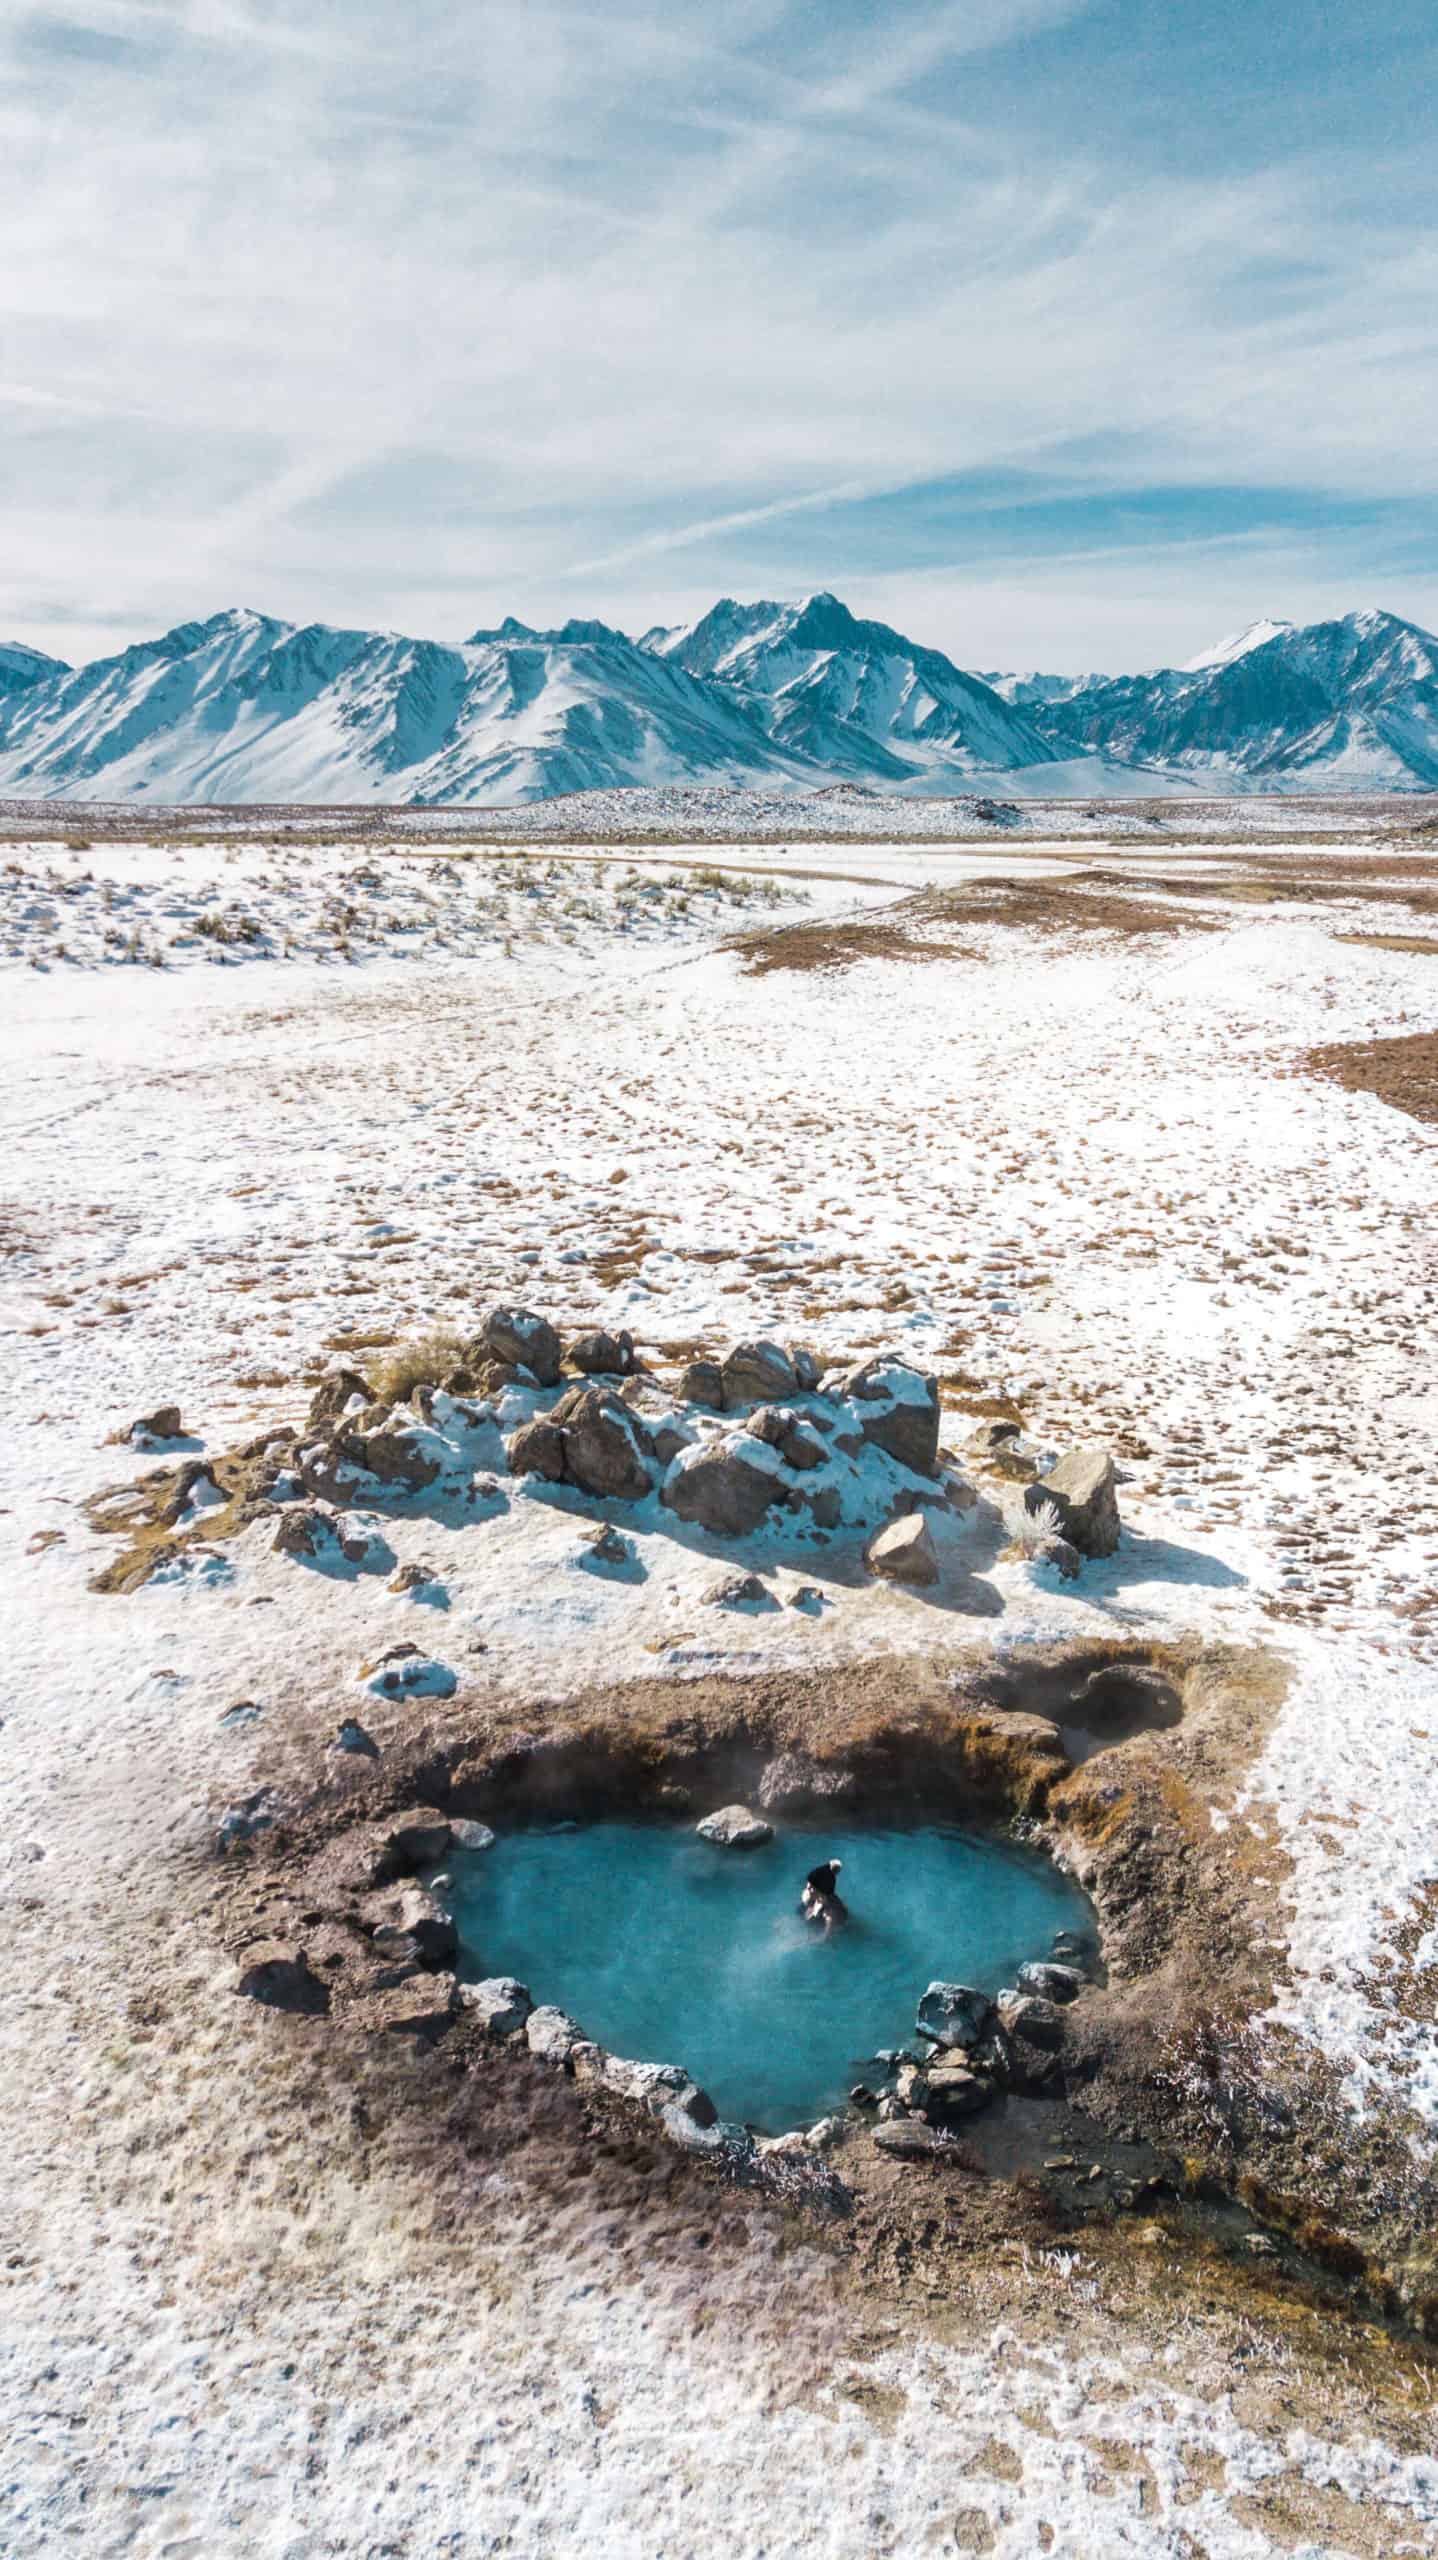 Heart shaped hot spring at Wild Willy